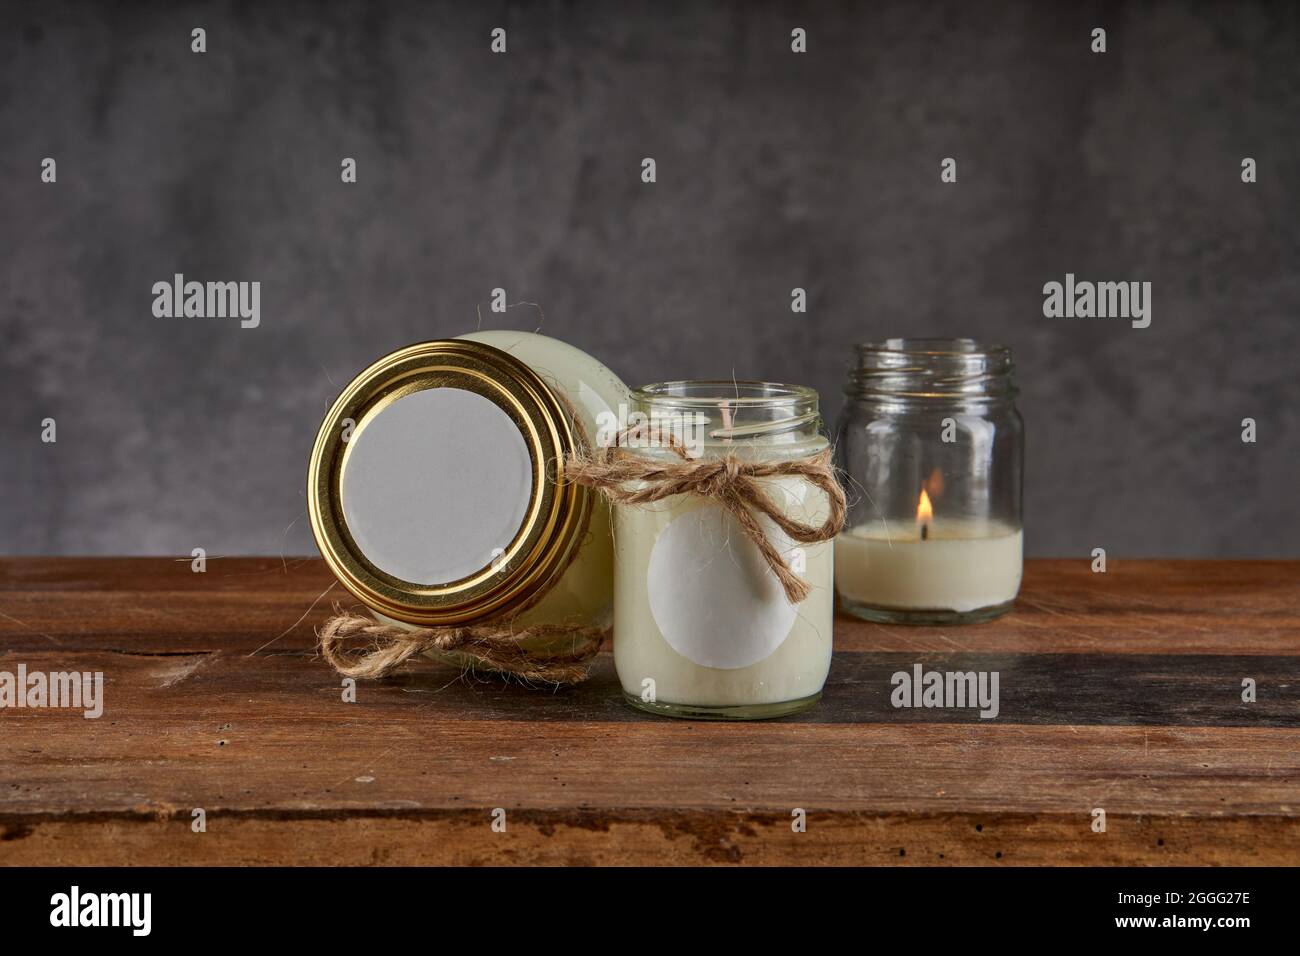 Beauty spa treatment and relaxation concept. candle for relaxing spa massage and body treatment on a wooden table and gray background. horizontal and Stock Photo